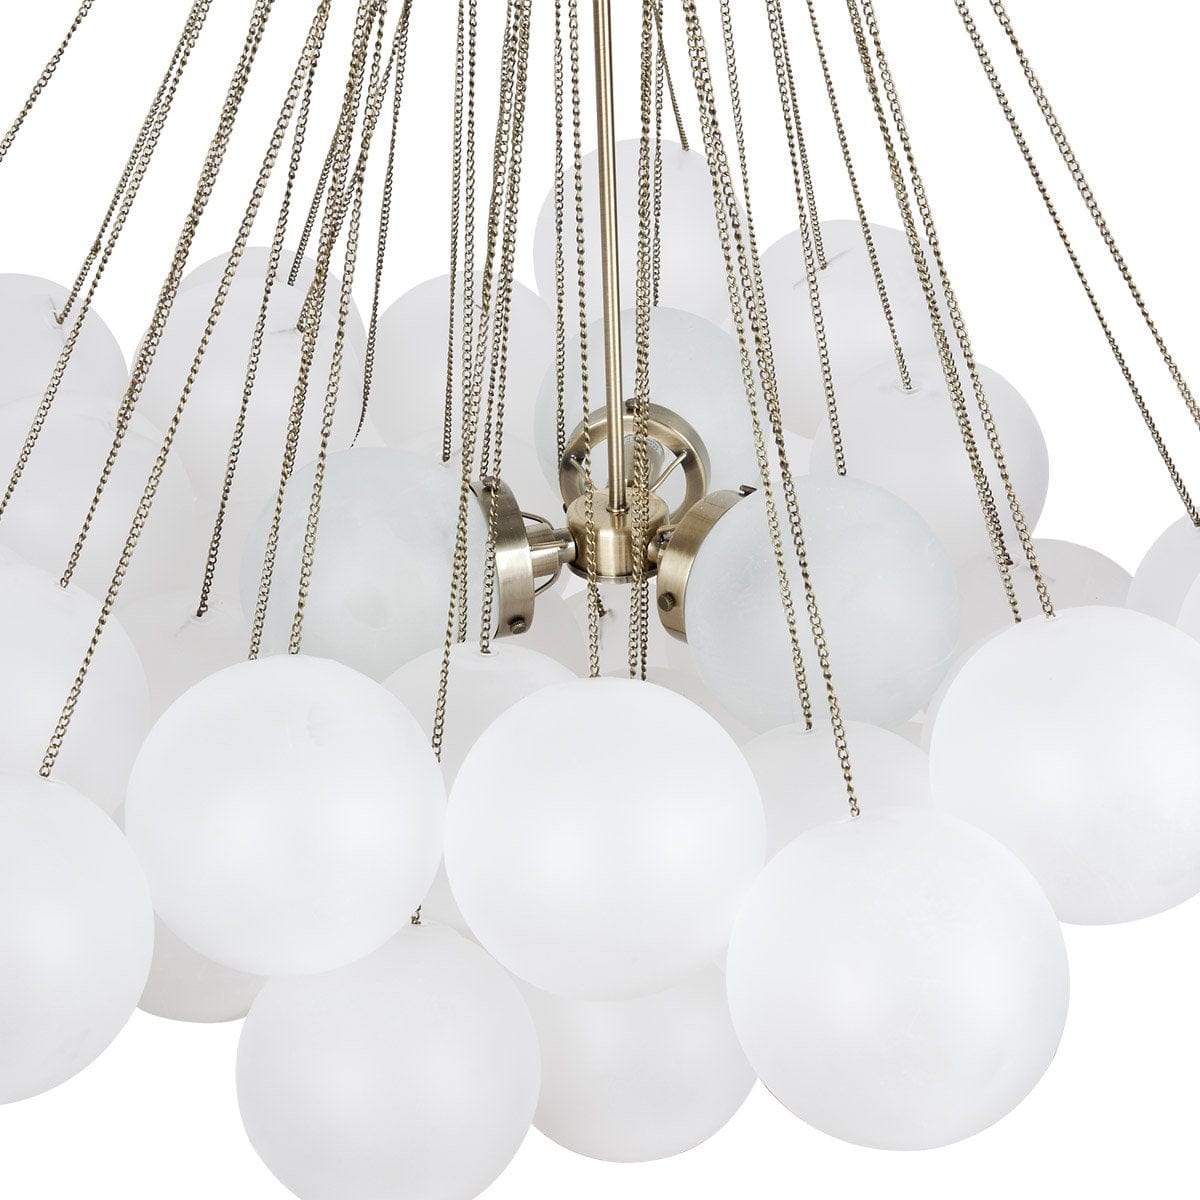 CAFE Lighting & Living Chandeliers CLOUD LARGE Glass Orbs Pendant 20709